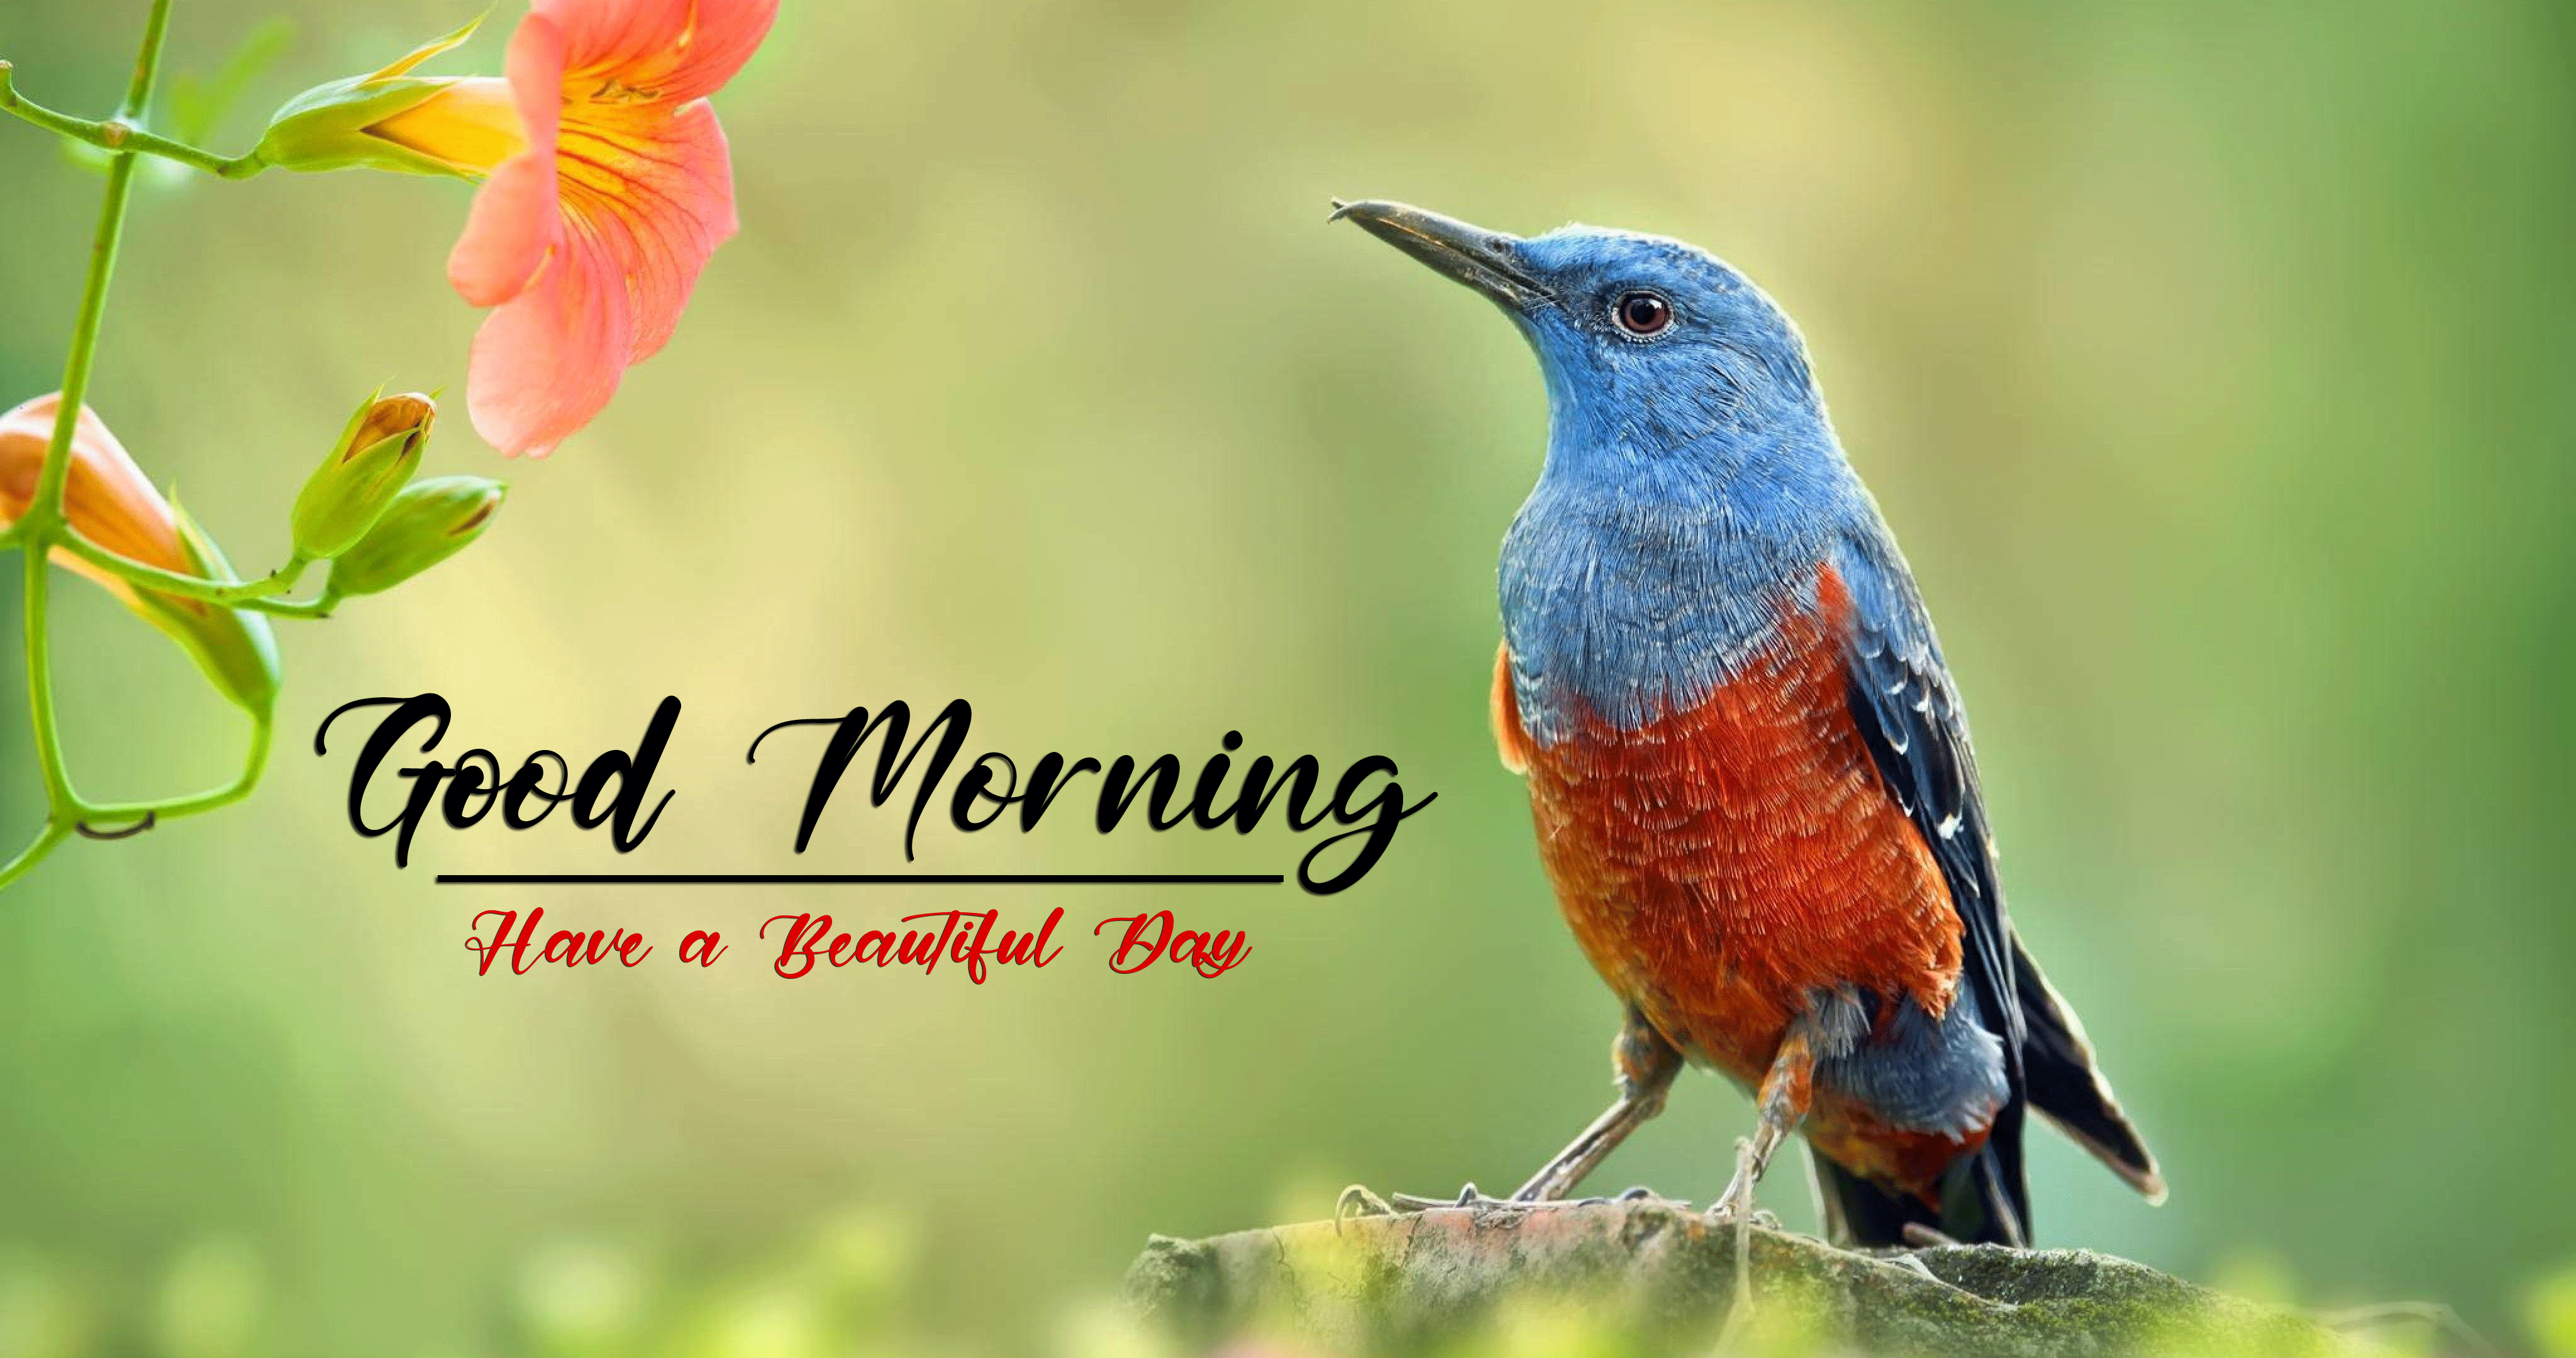 best good morning images photo free download